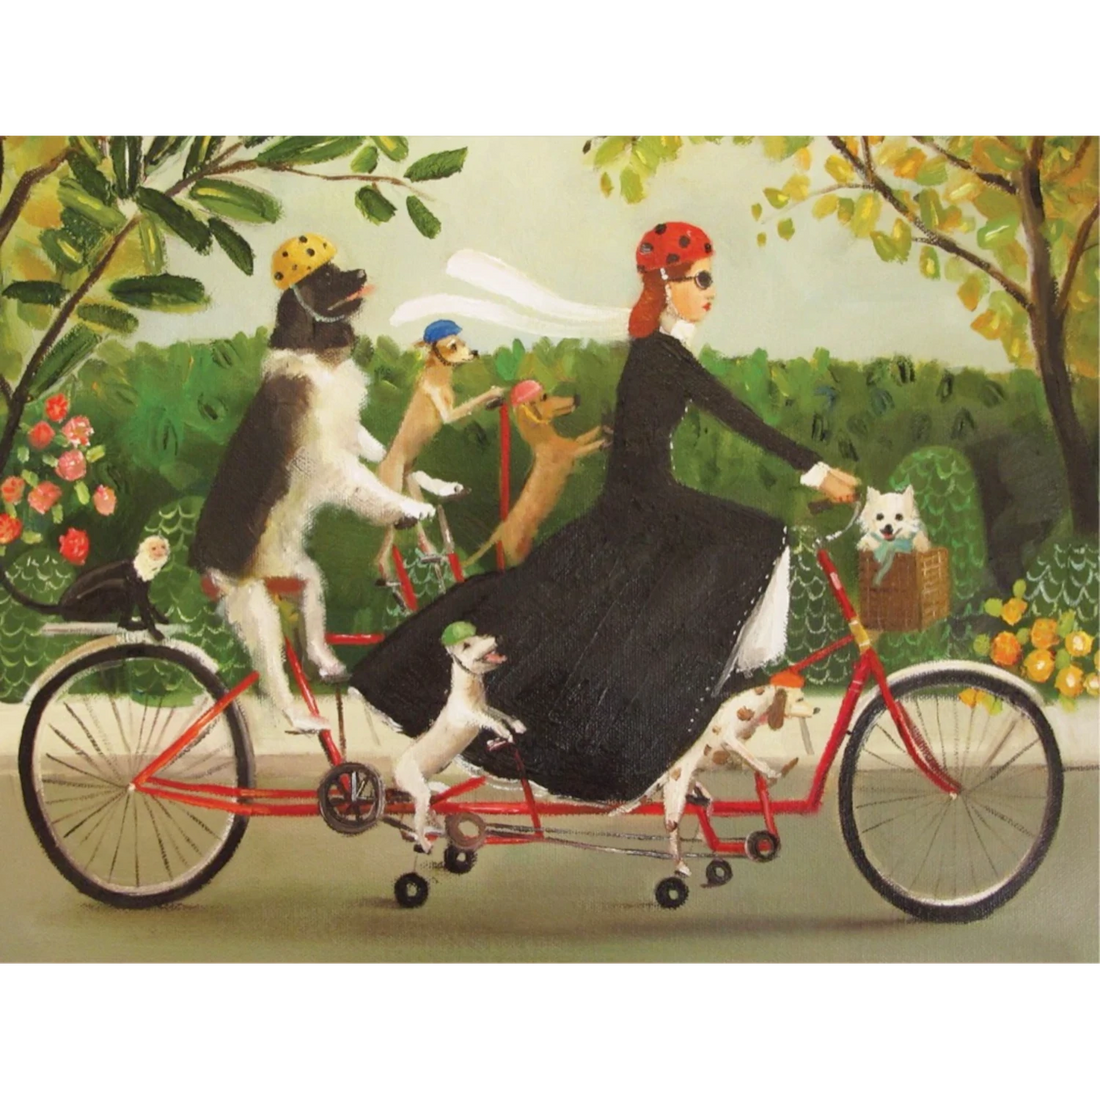 An illustration by artist Janet Hill of a woman and four dogs on a tandem bicycle riding through a garden featuring Miss Moon&